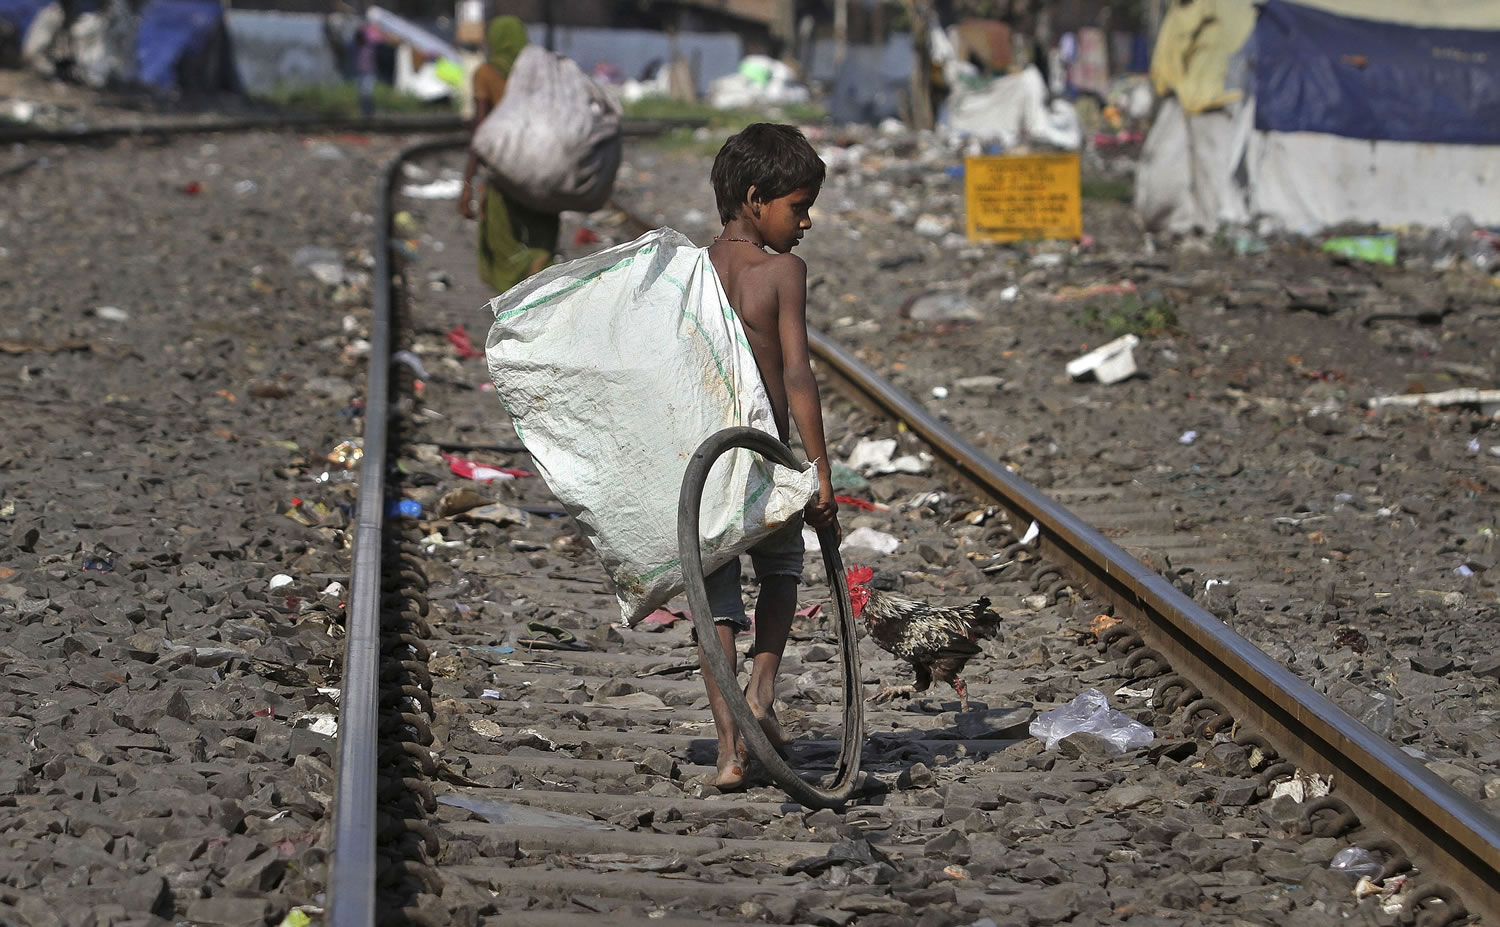 An Indian ragpicker searches Friday for reusable materials from garbage thrown on railway tracks in Gauhati, India.